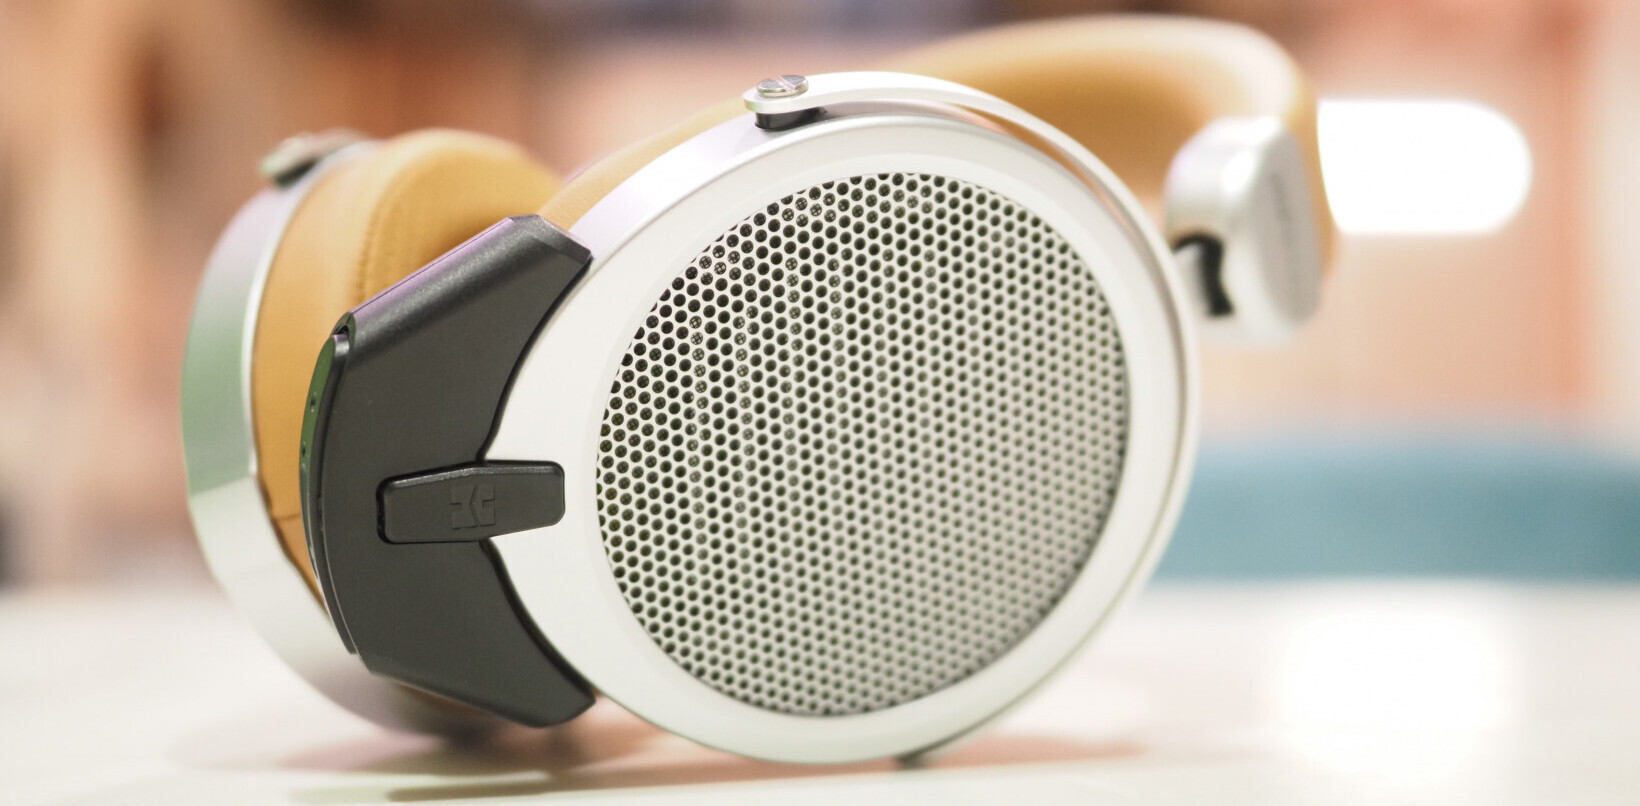 Review: The Hifiman Deva are premium $300 headphones that happen to come with Bluetooth